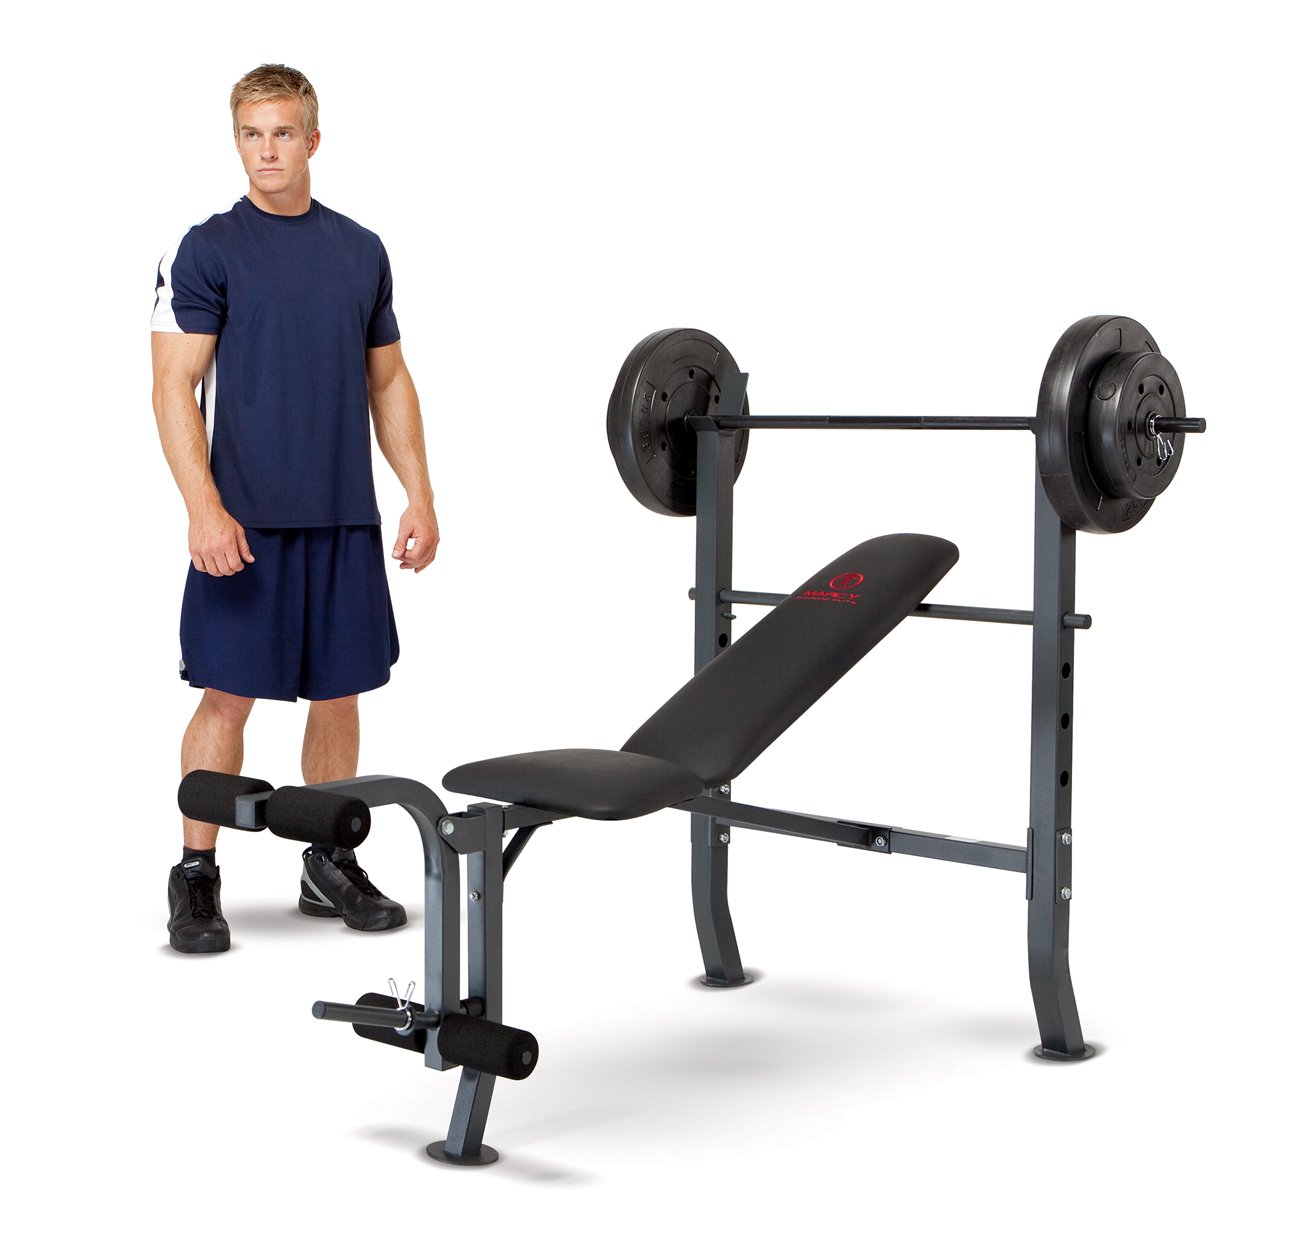 Marcy Standard Bench with 80 lb Weight Set Home Gym Workout Equipment - image 1 of 5